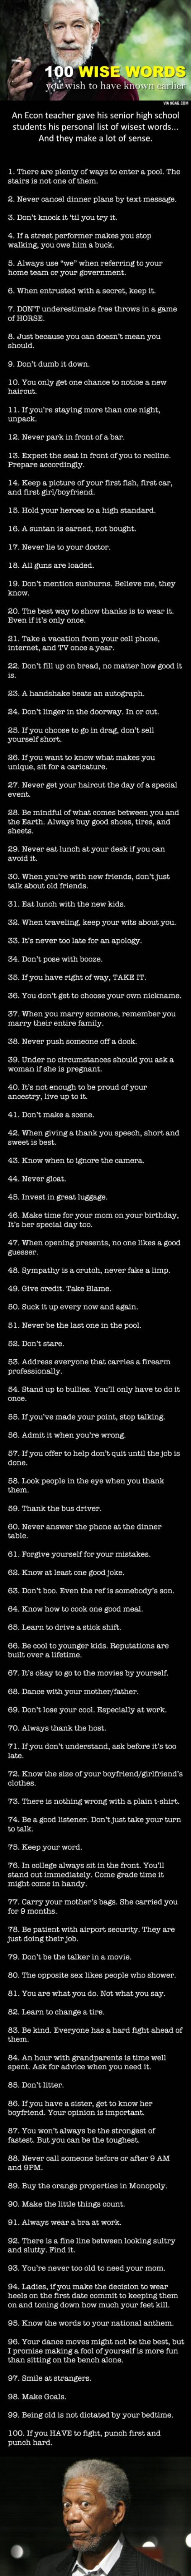 100 wise words